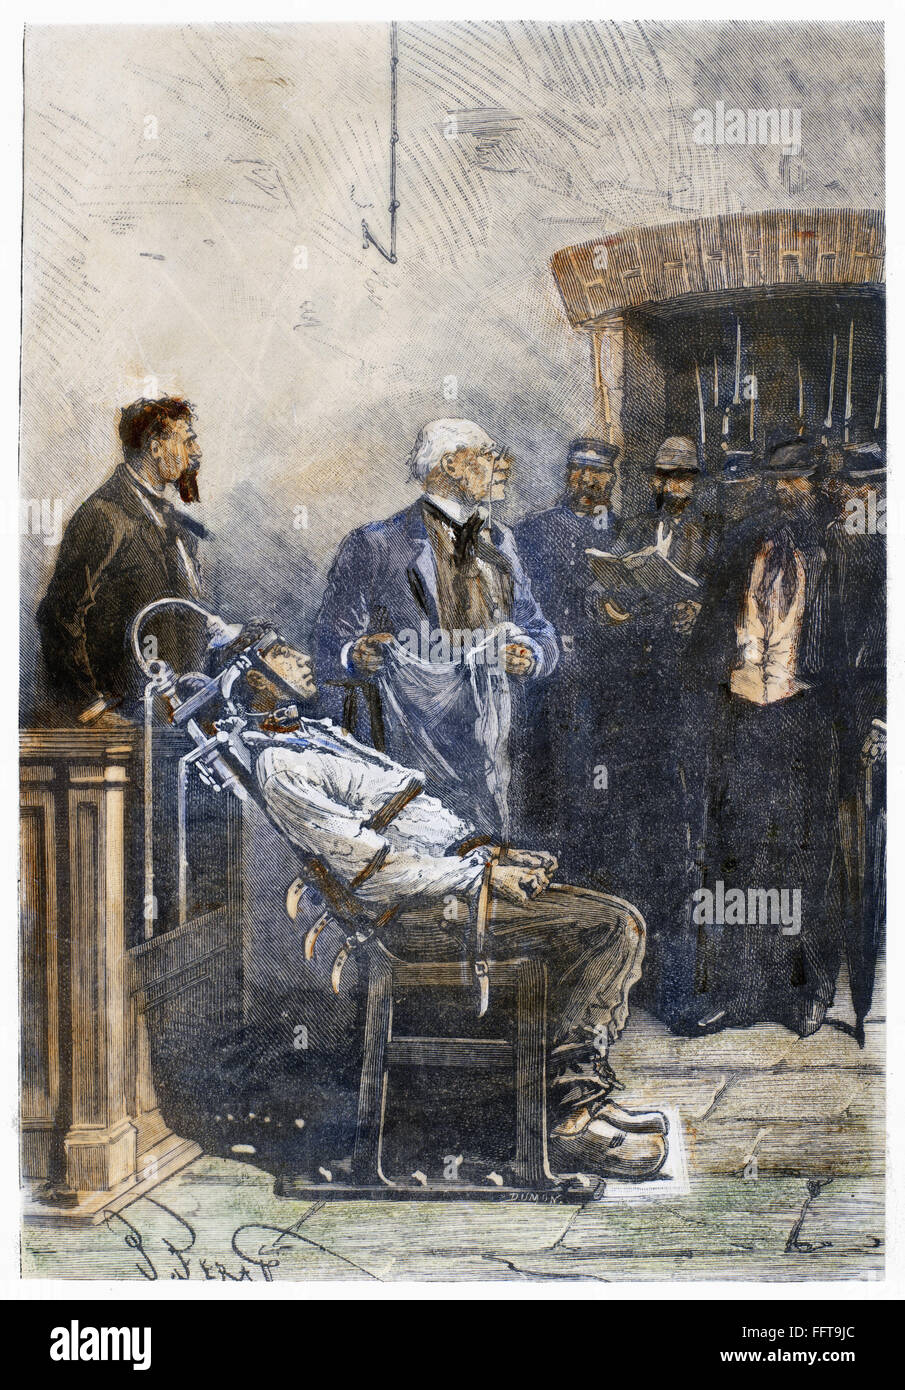 ELECTROCUTION, 1890. /nThe first execution by electrocution, of William Kemmler, for murder, at Auburn Prison, Auburn, New York, 6 August 1890. Contemporary wood engraving. Stock Photo